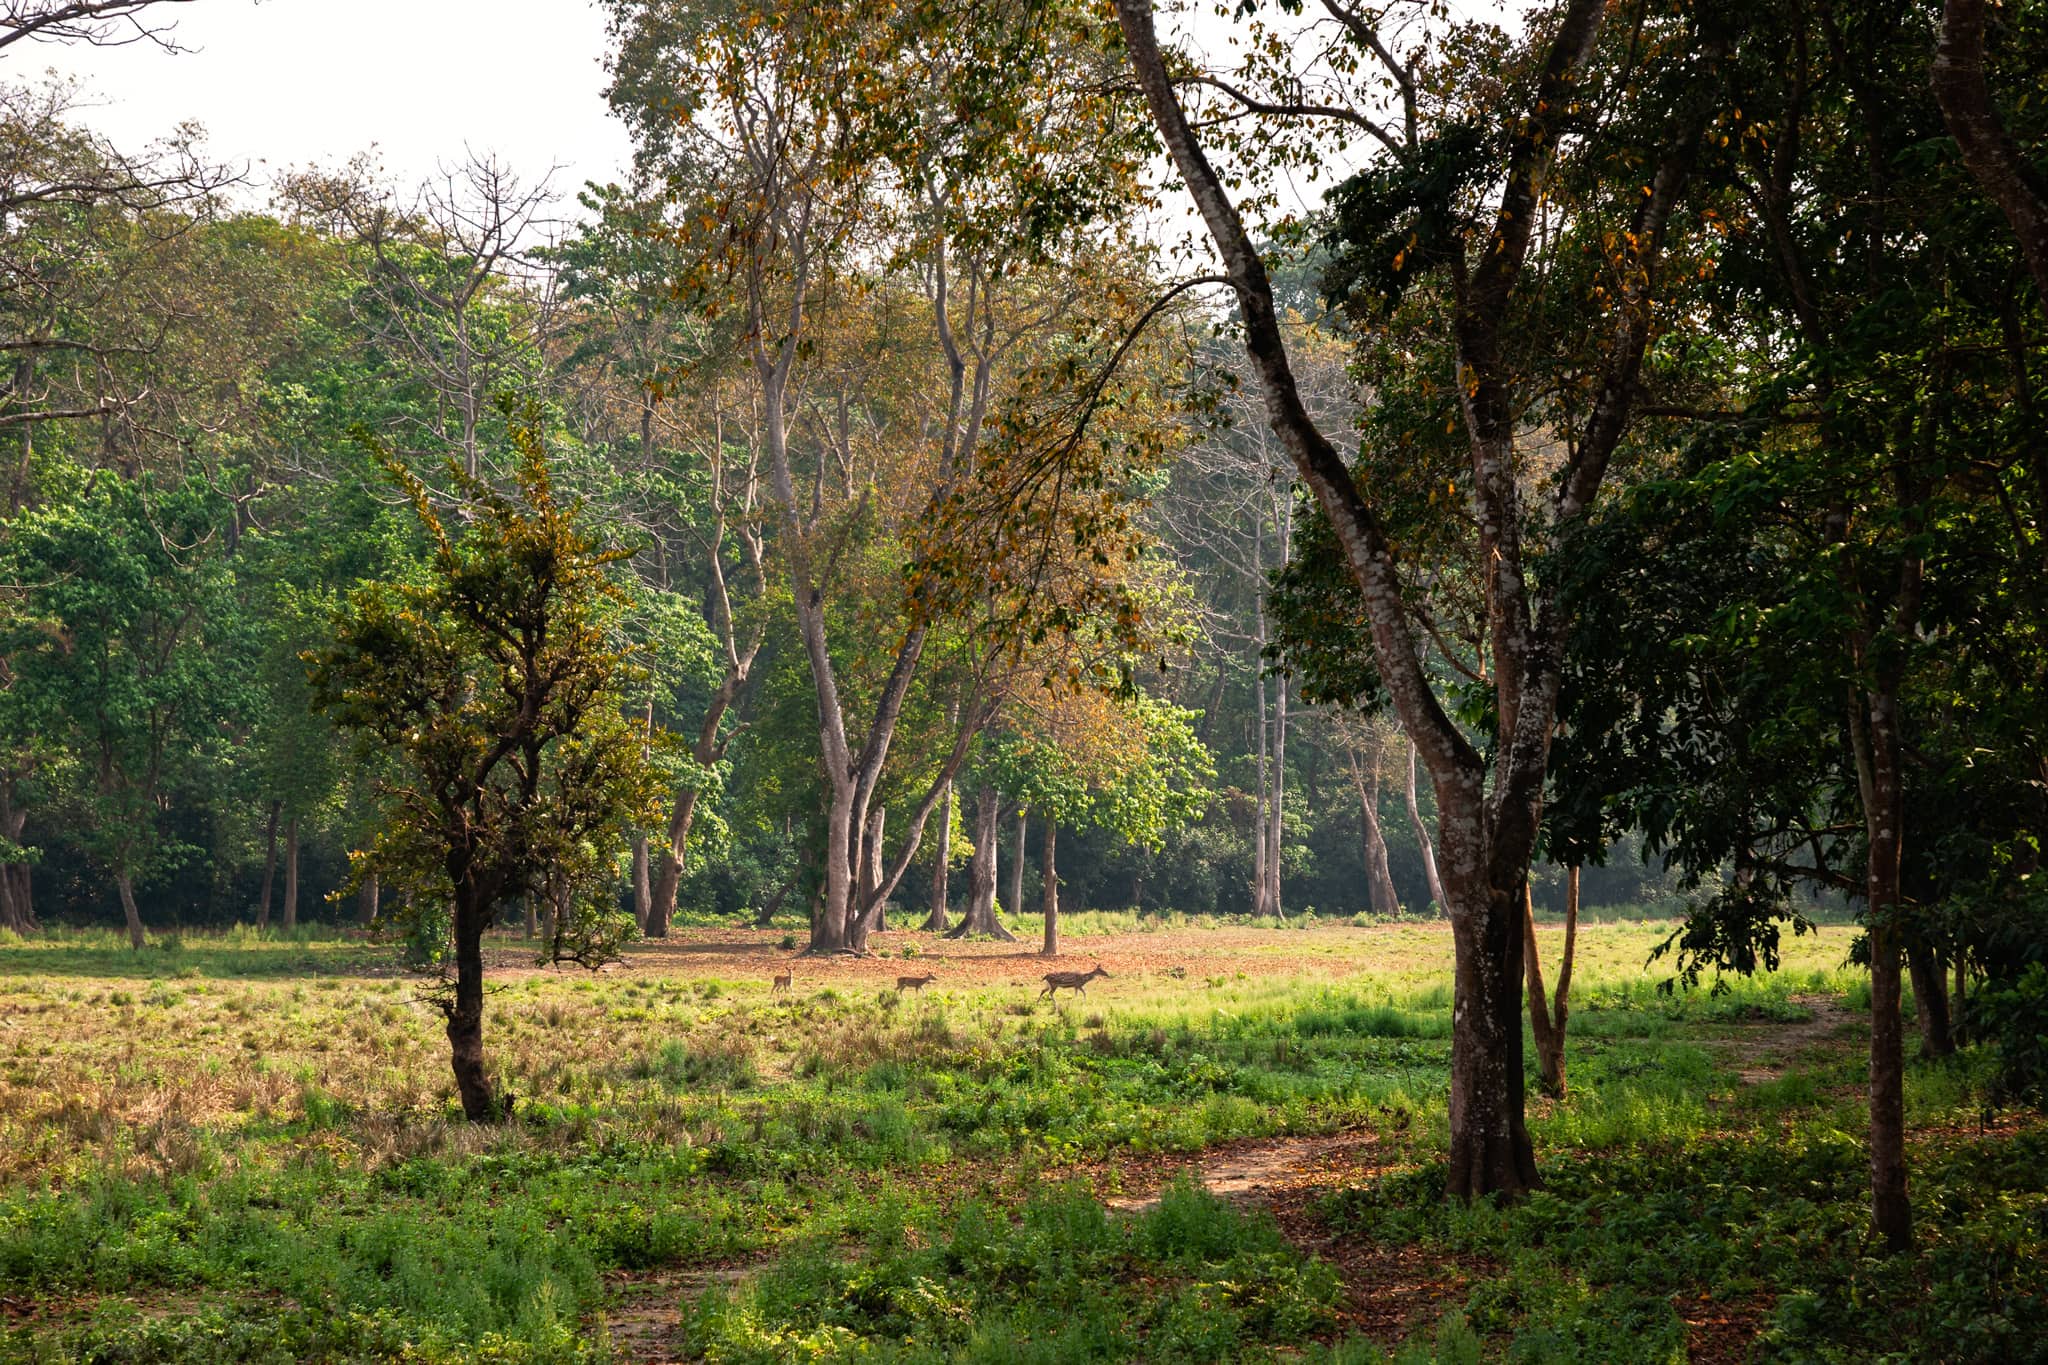 Spotted deers roam in the forest of Chitwan National Park in Nepal.